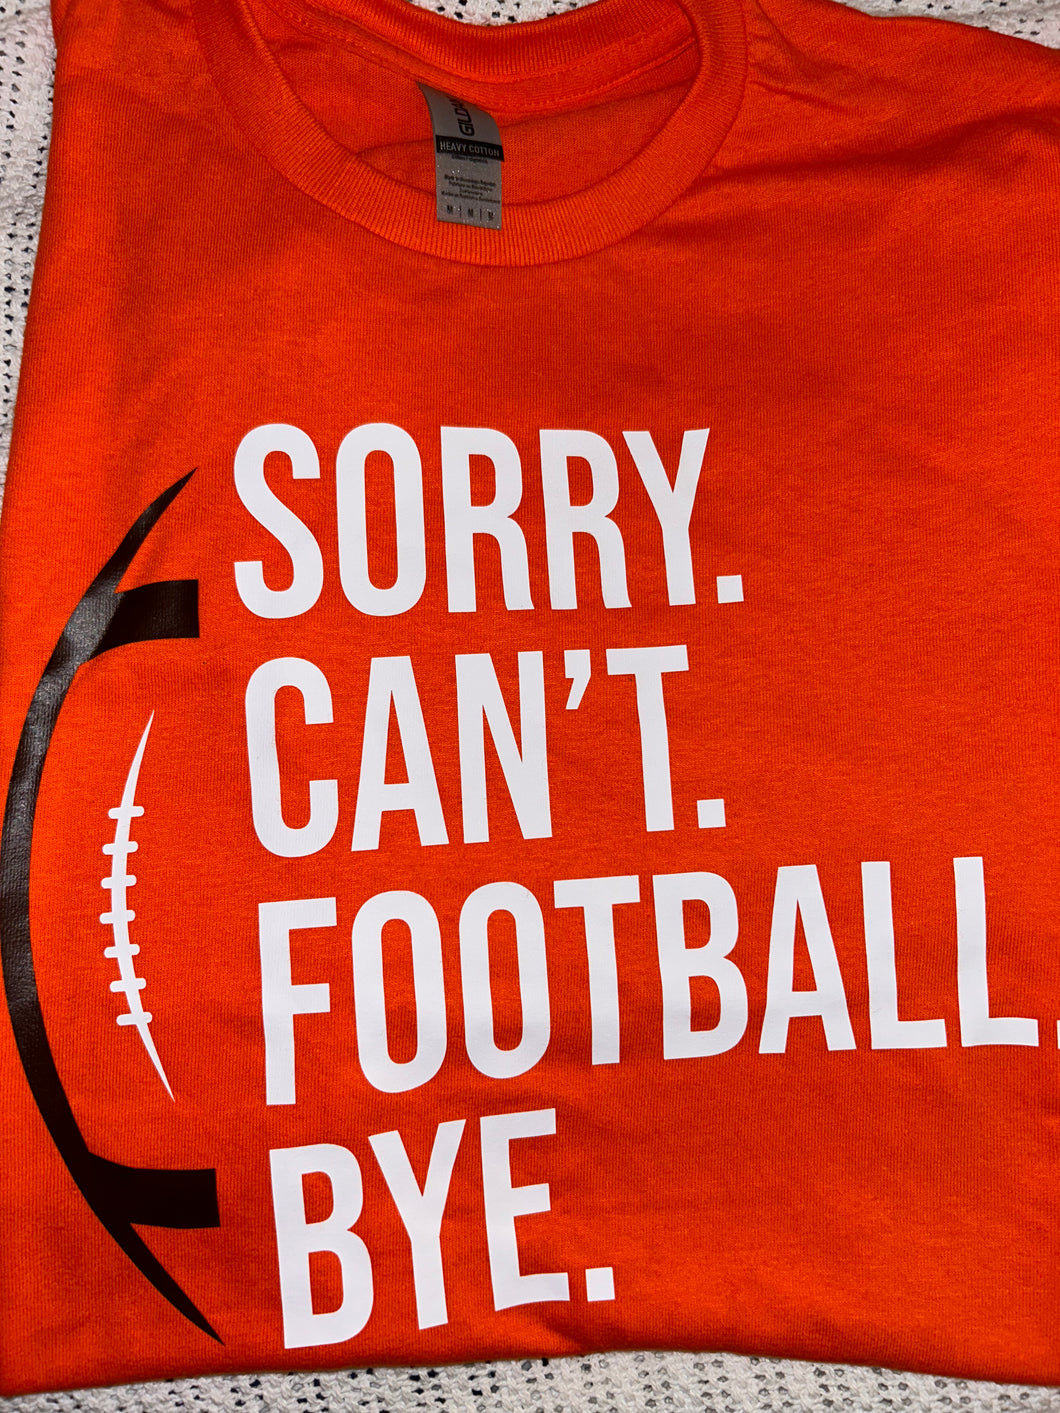 Sorry. Can’t. Football. Bye.